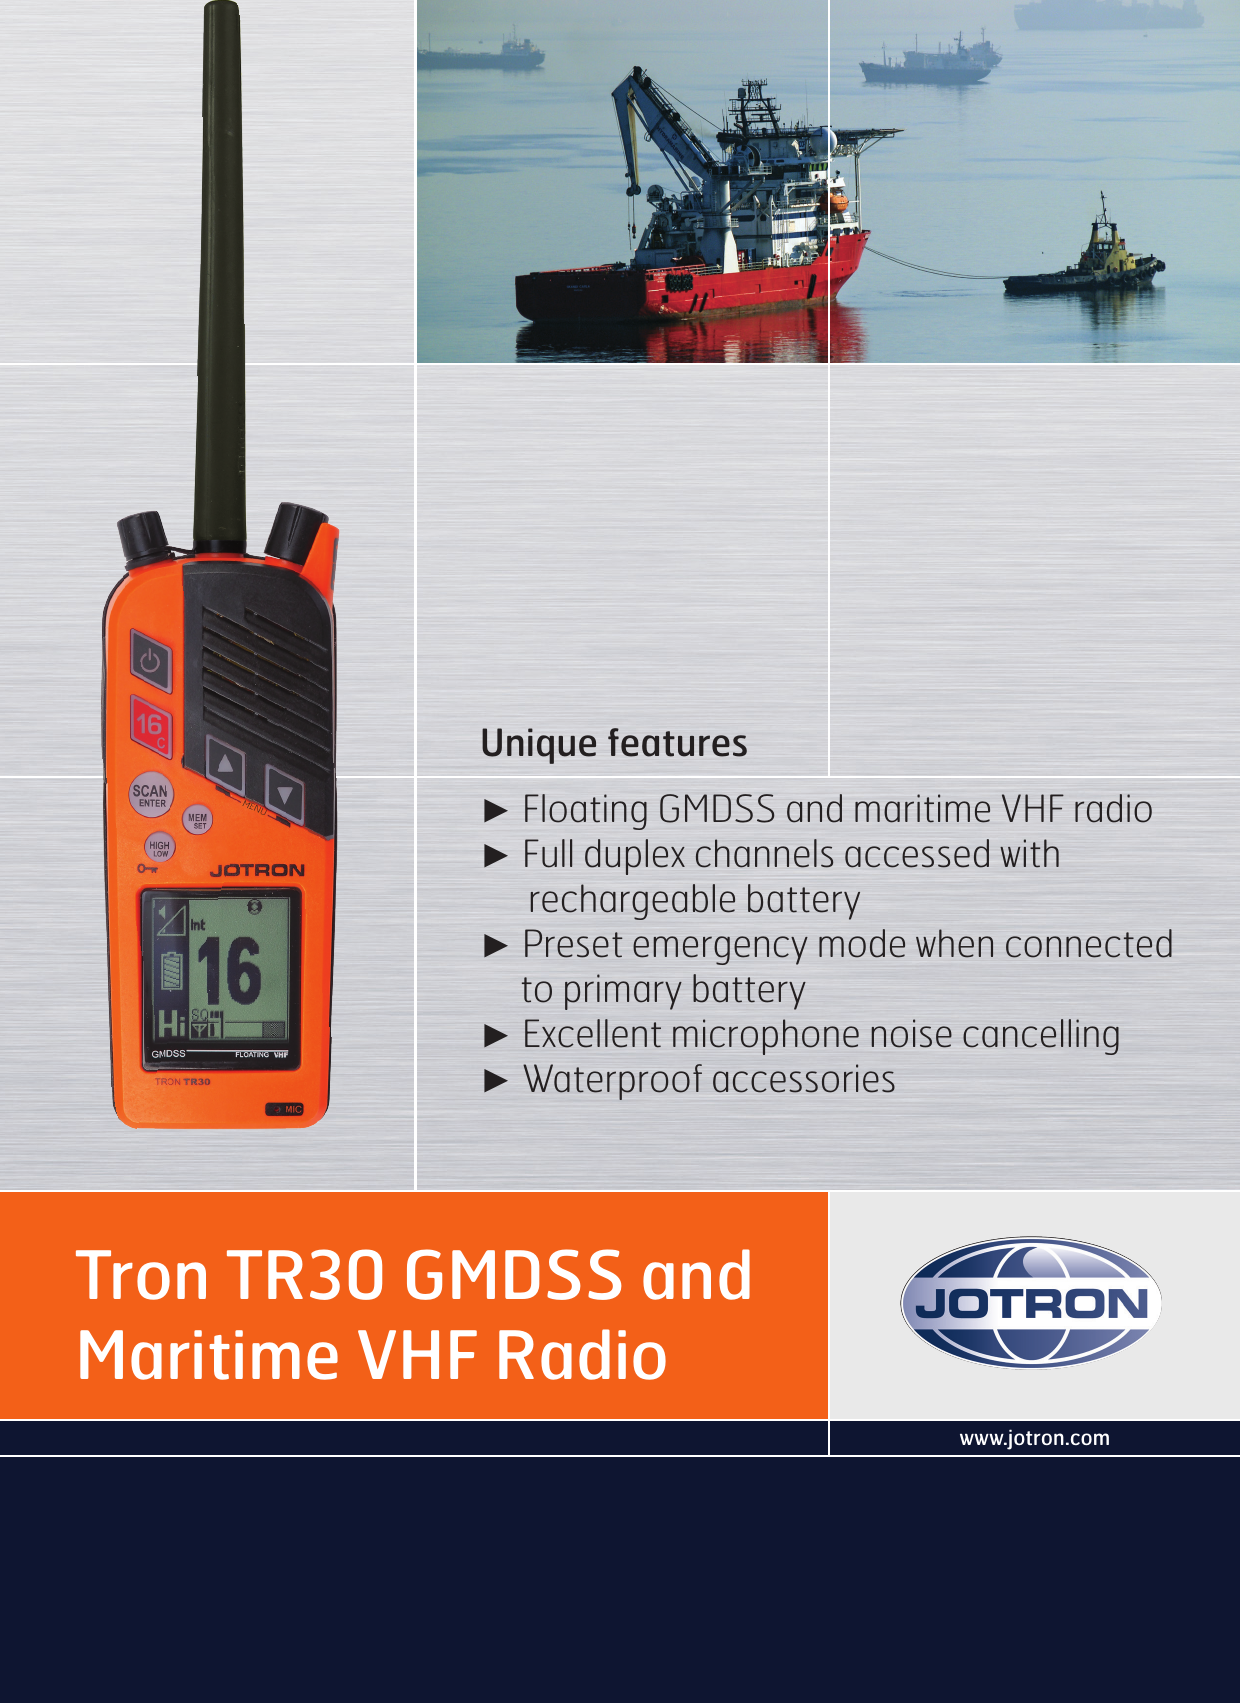 www.jotron.comTron TR30 GMDSS and Maritime VHF RadioUnique features ► Floating GMDSS and maritime VHF radio► Full duplex channels accessed with       rechargeable battery► Preset emergency mode when connected     to primary battery► Excellent microphone noise cancelling► Waterproof accessories